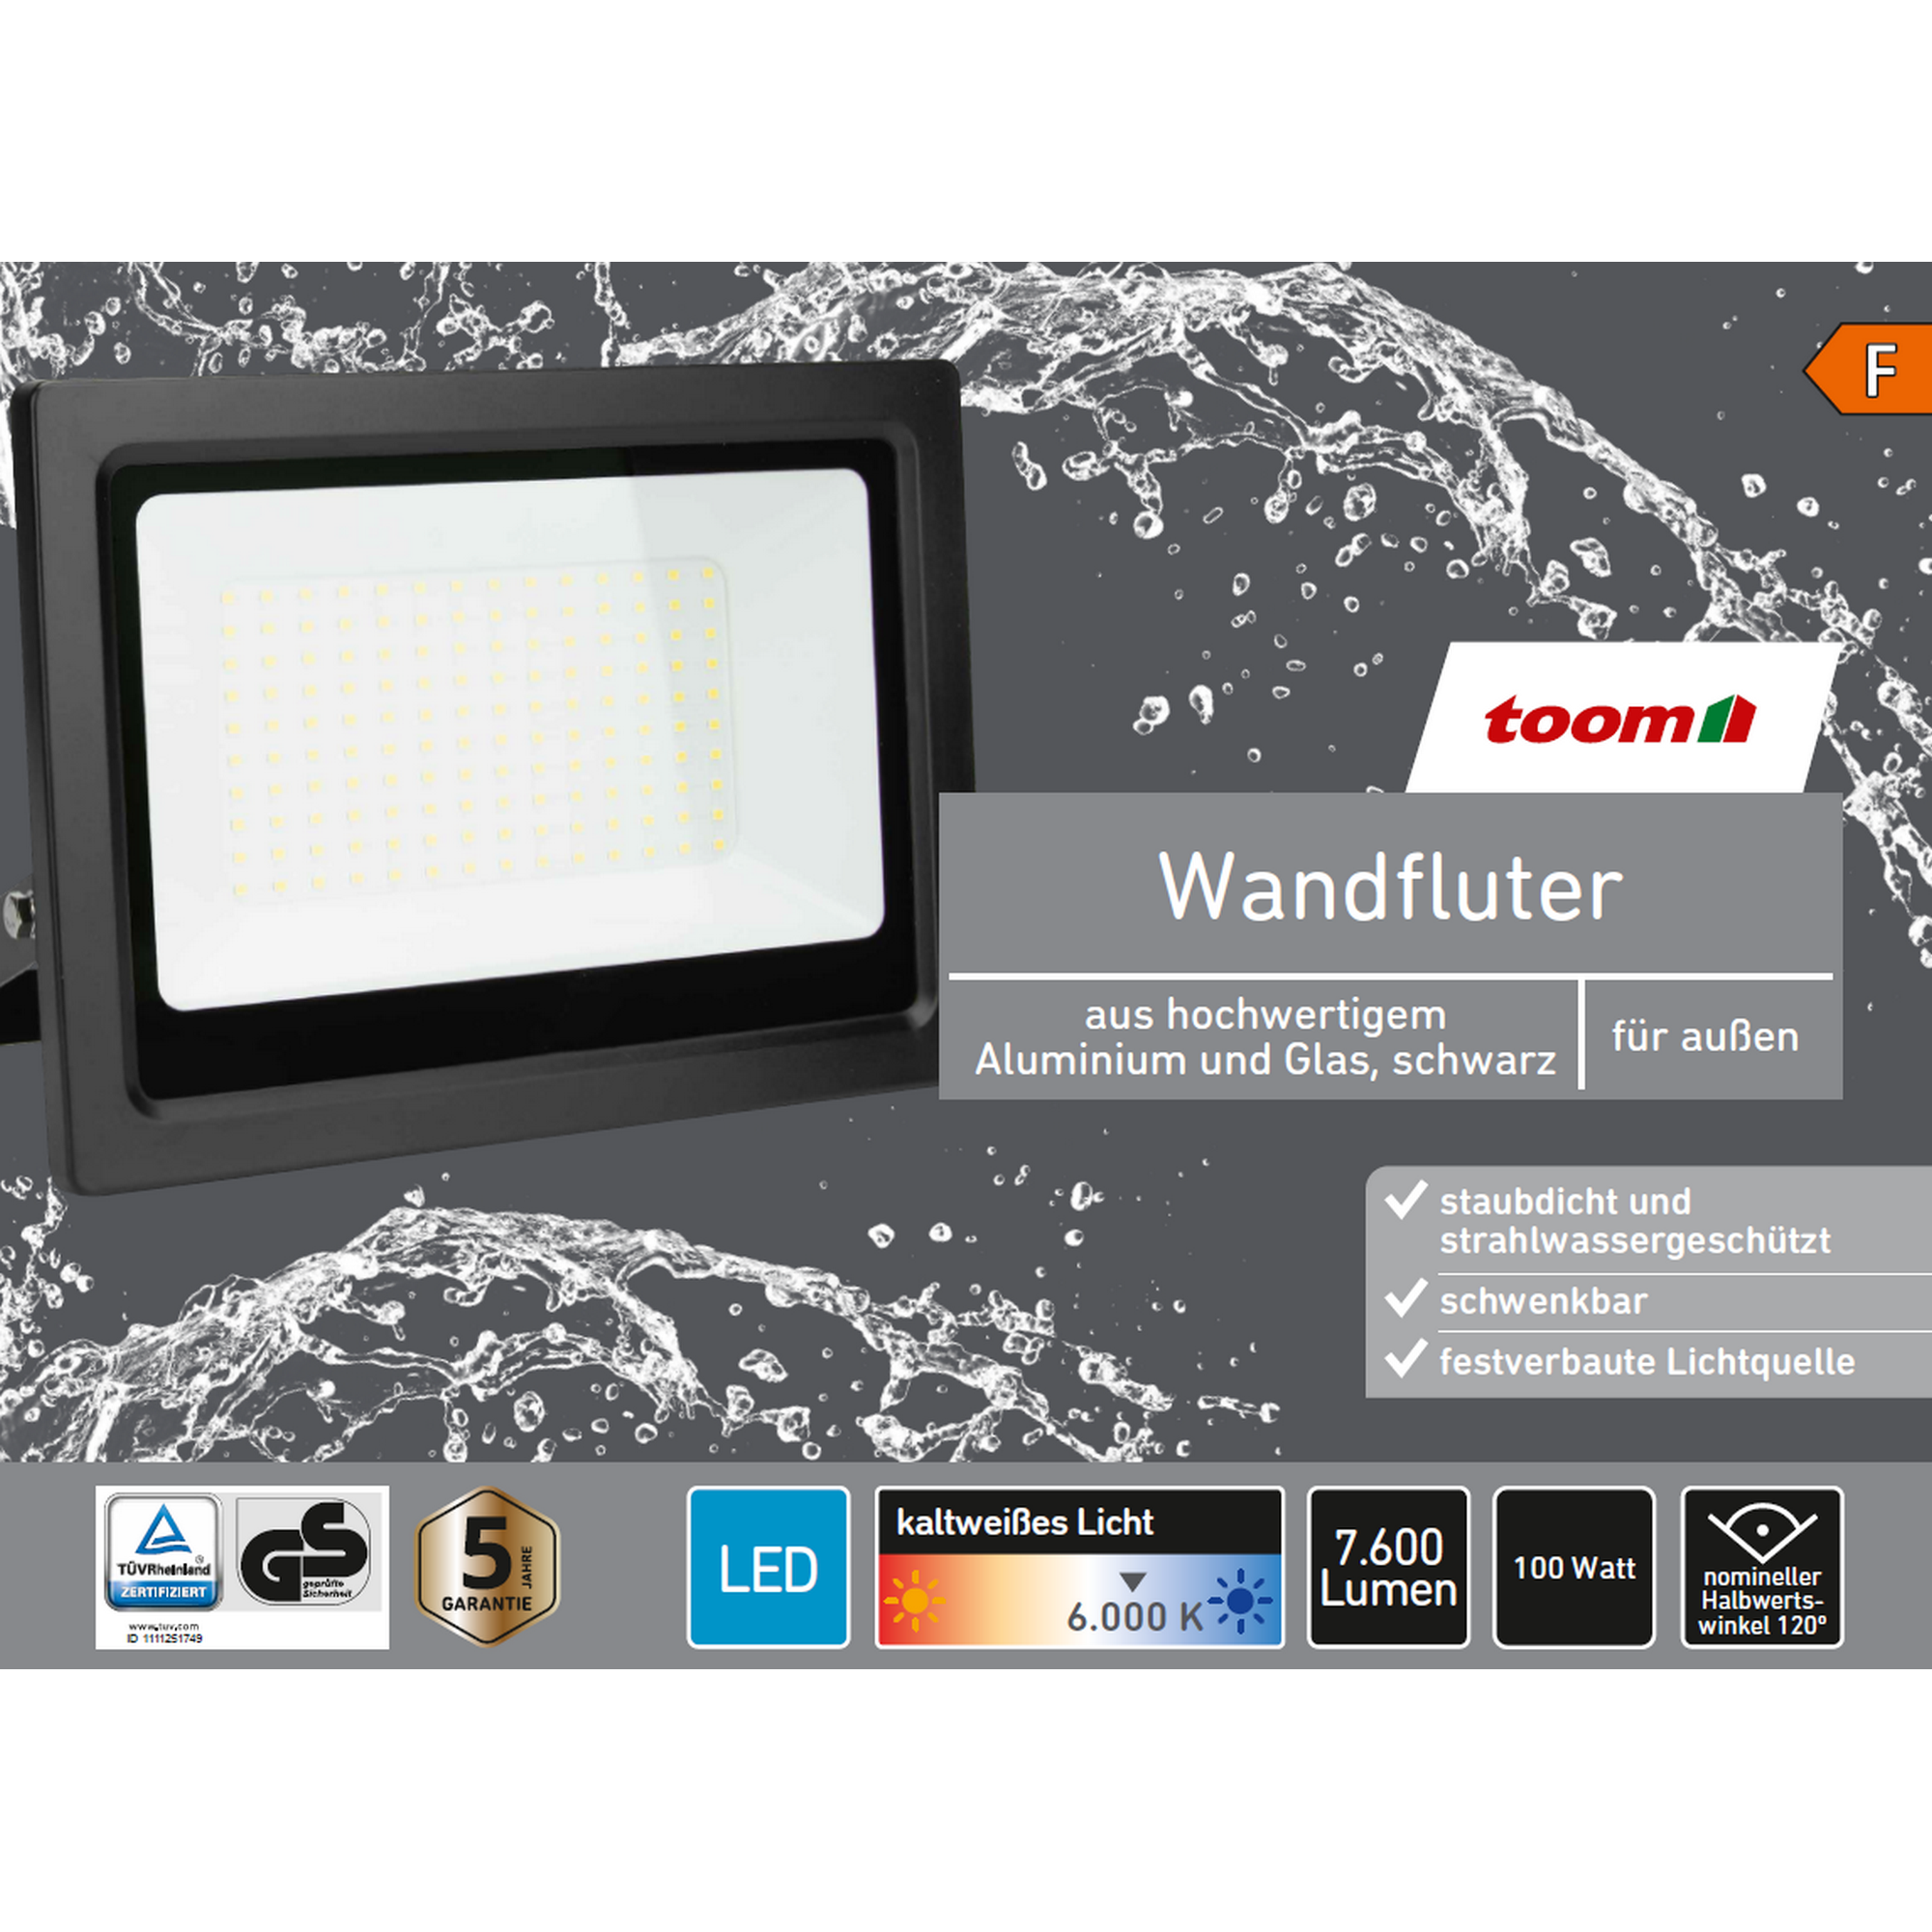 LED-Wandfluter schwarz 100 W 7600 lm + product picture